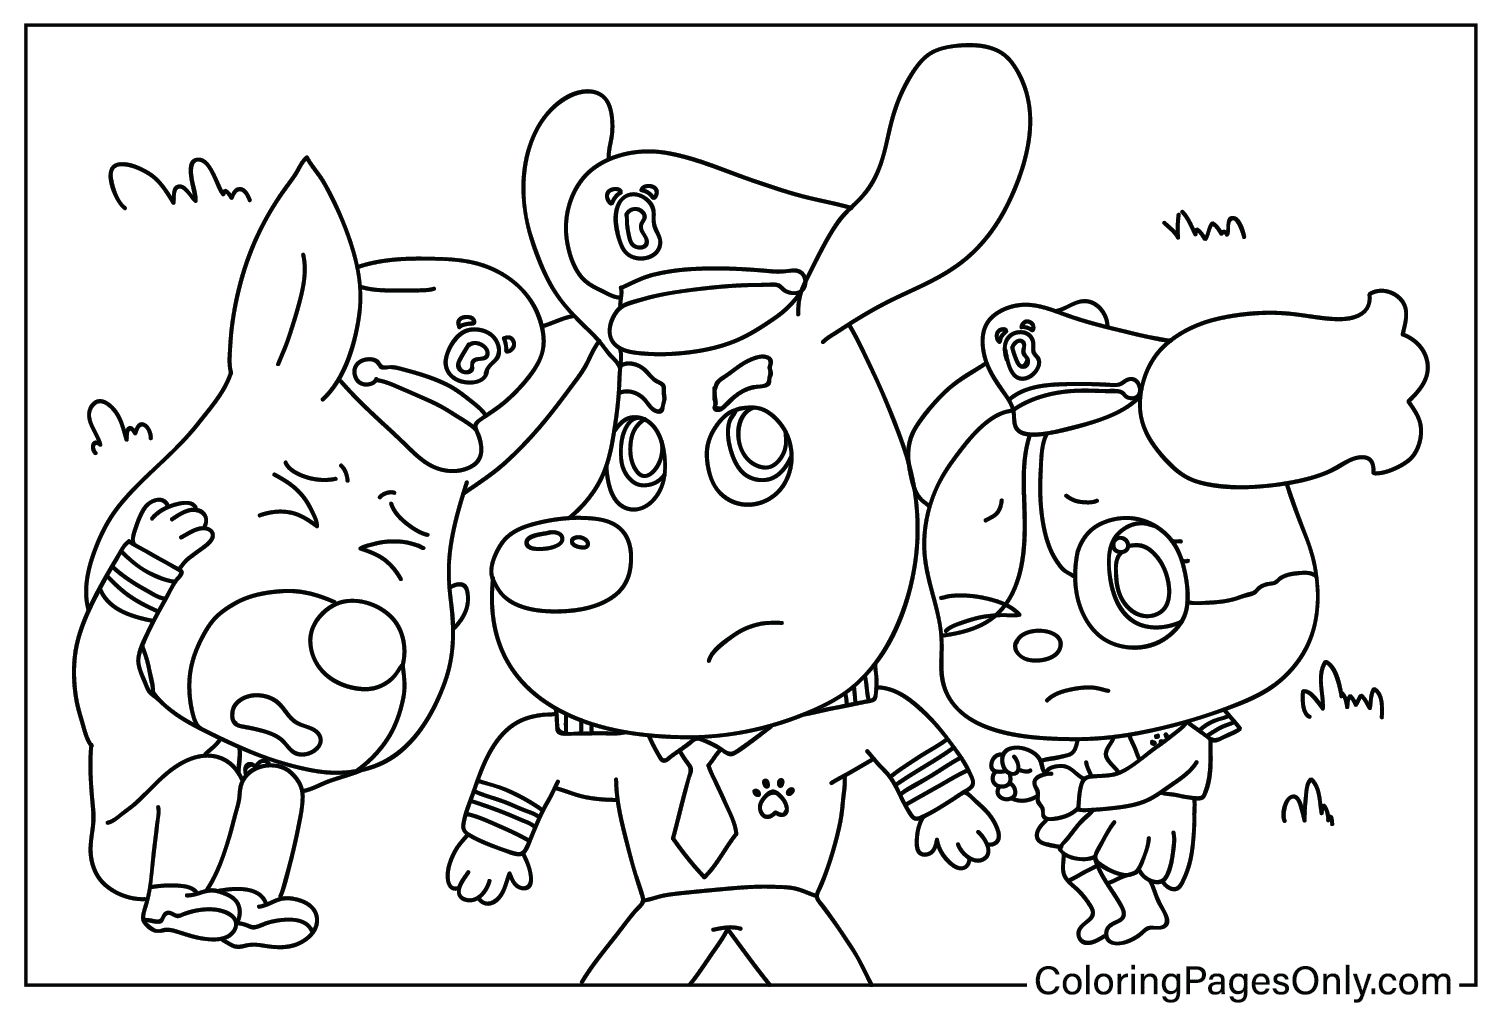 Safety Sheriff Labrador Coloring Page from Safety Sheriff Labrador